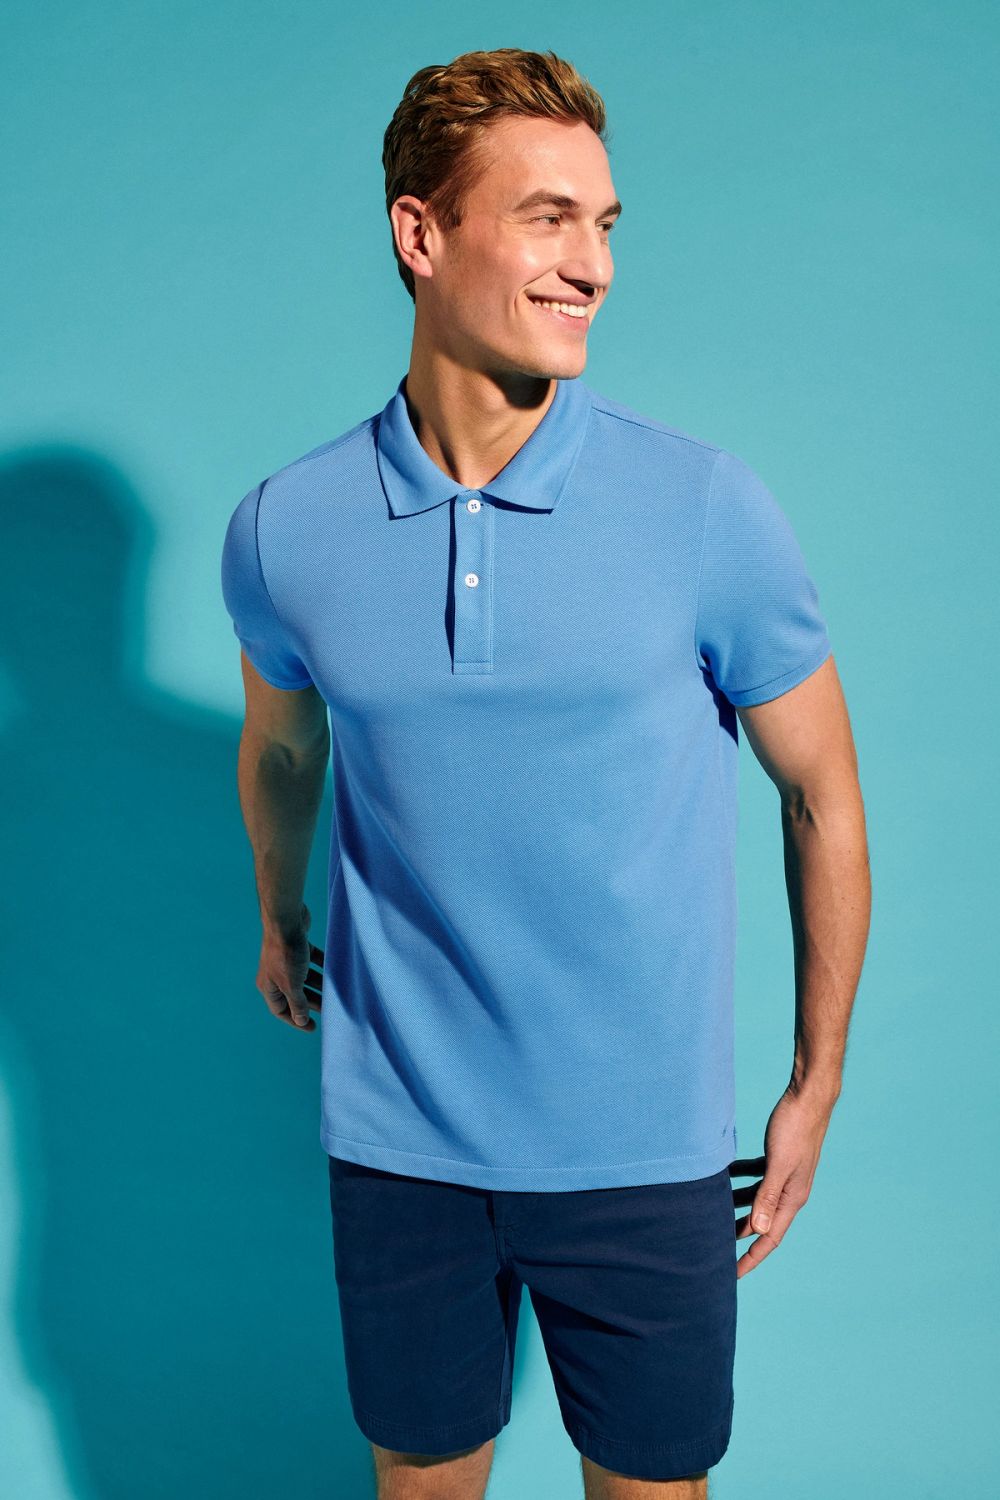 Boulevards * The Classic Polo